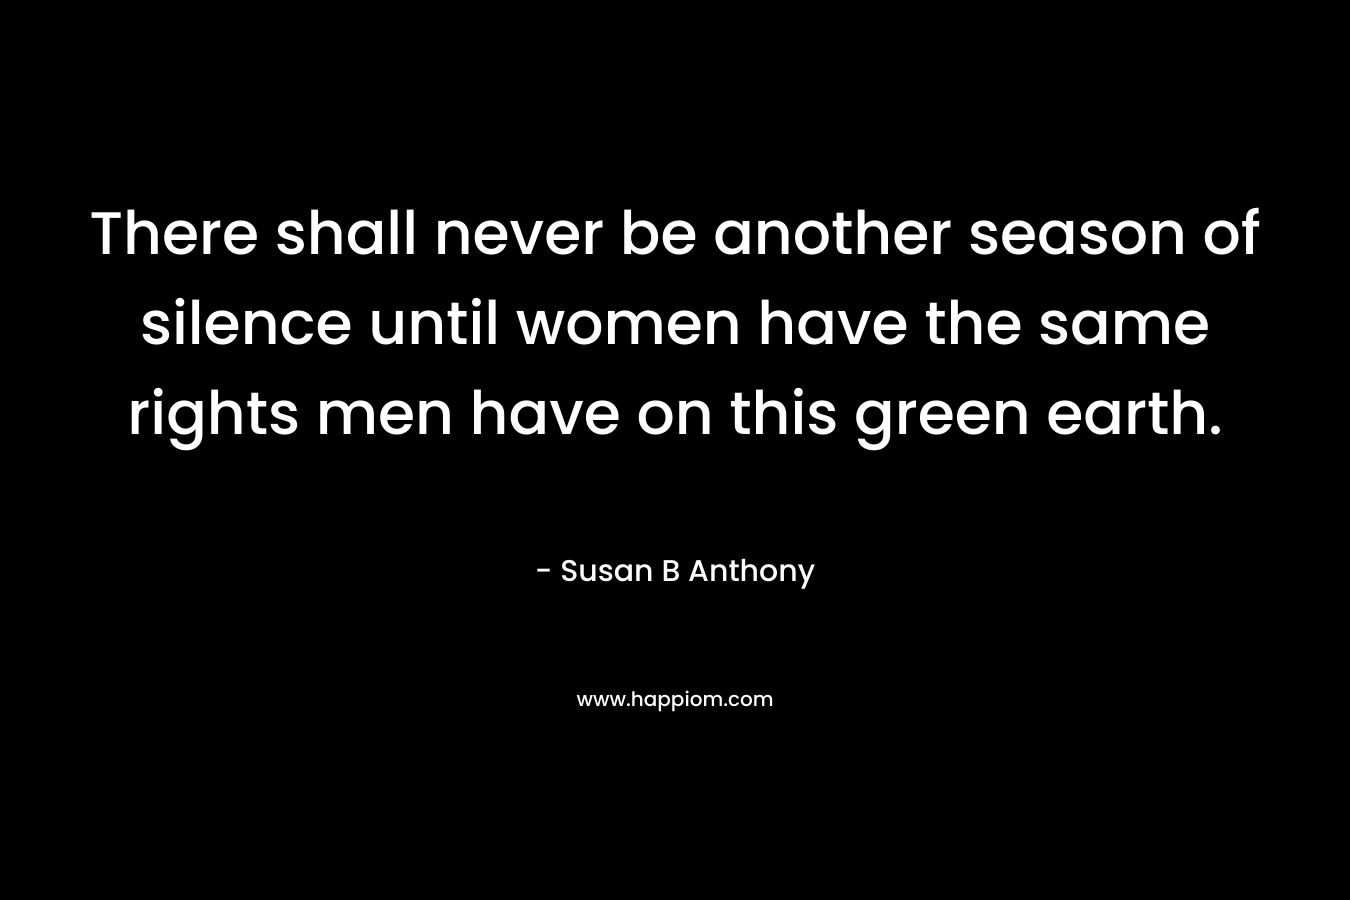 There shall never be another season of silence until women have the same rights men have on this green earth. – Susan B Anthony